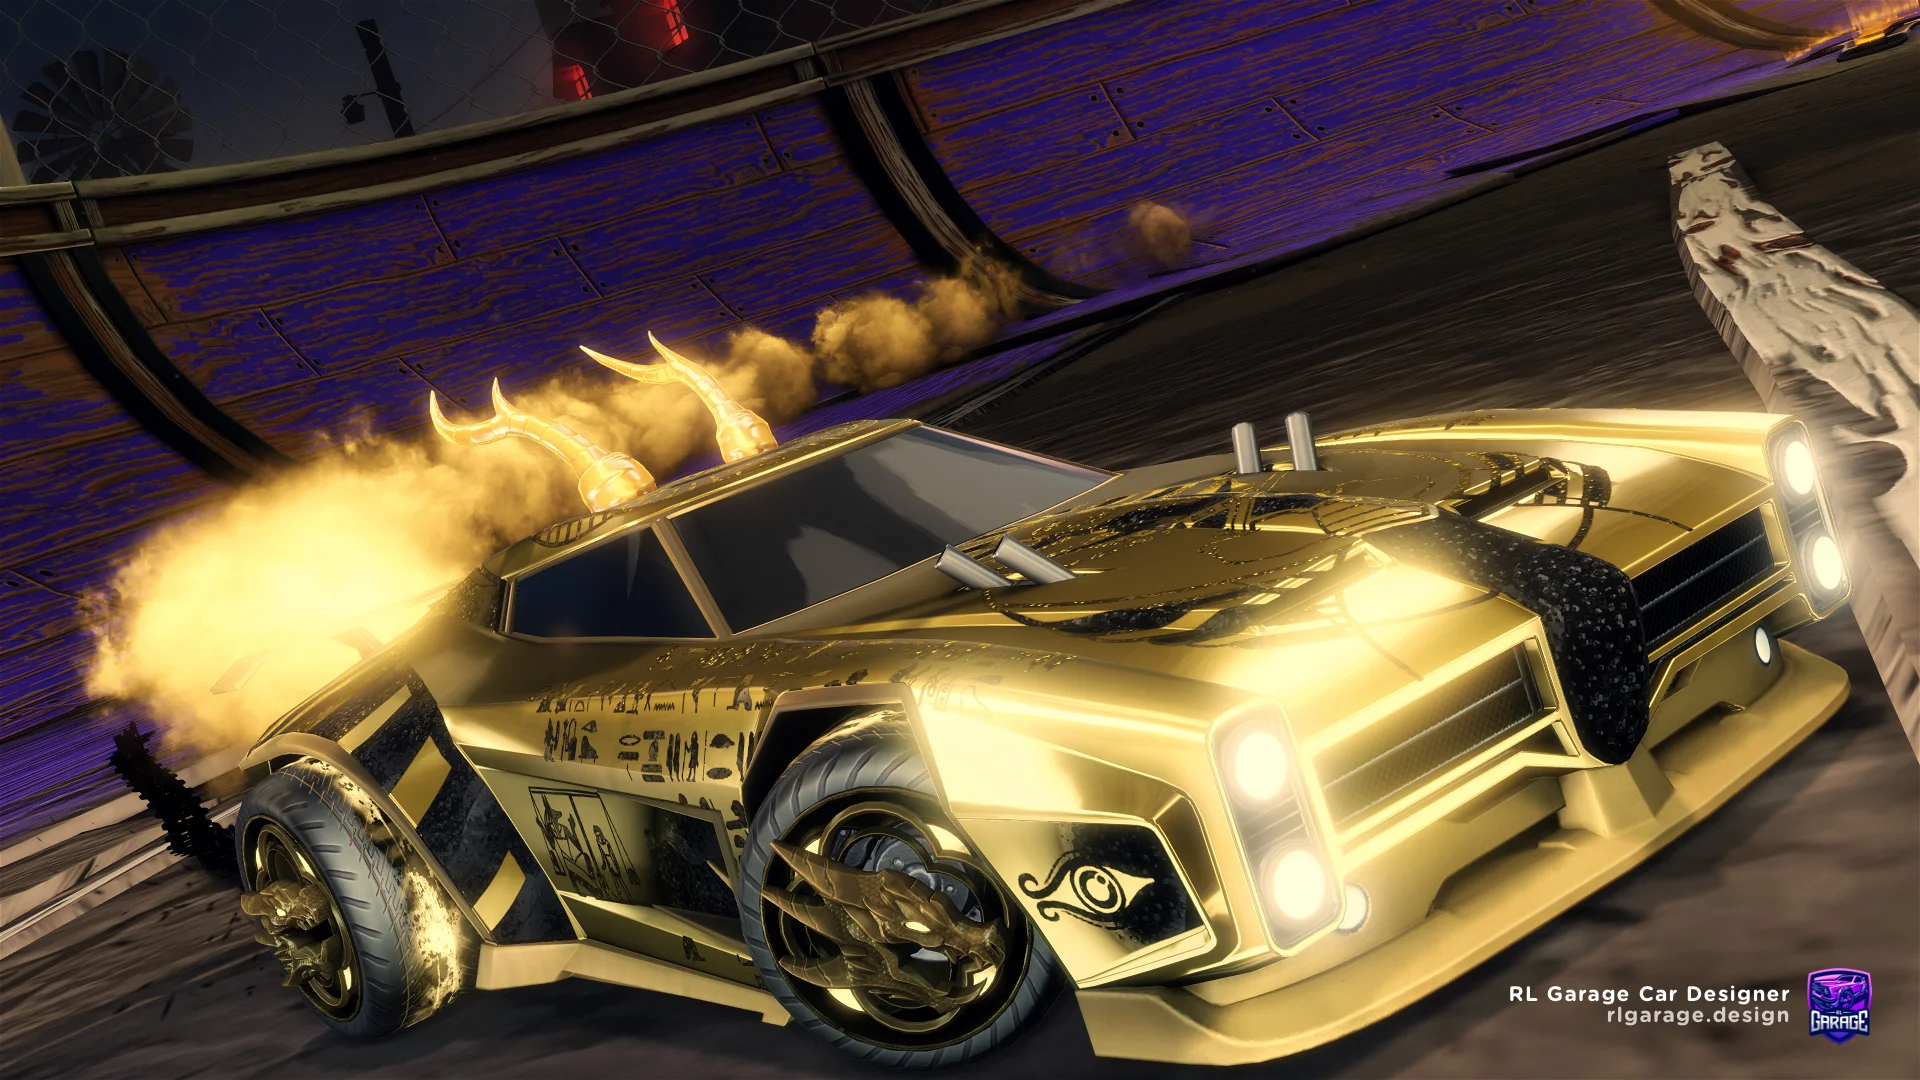 BUYING A GOLDEN DOMINUS FOR CHEAP (My Plan)